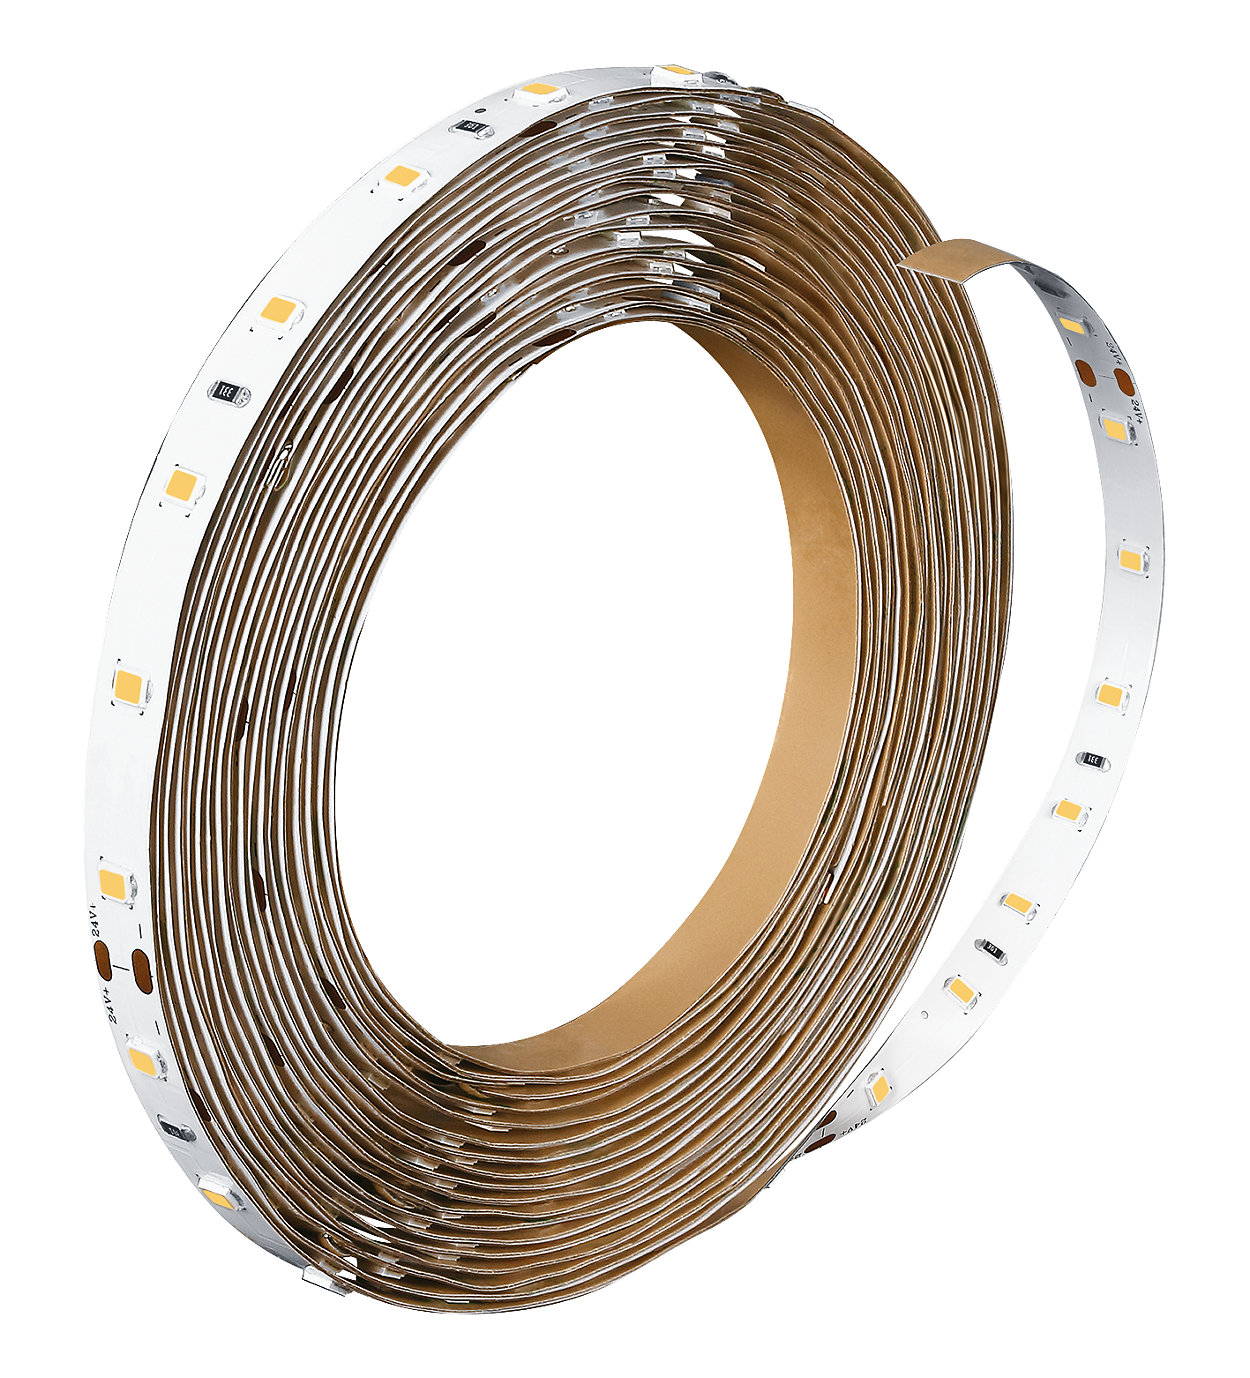 Slim LED strip offering high quality light with diversified options in terms of brightness and light color